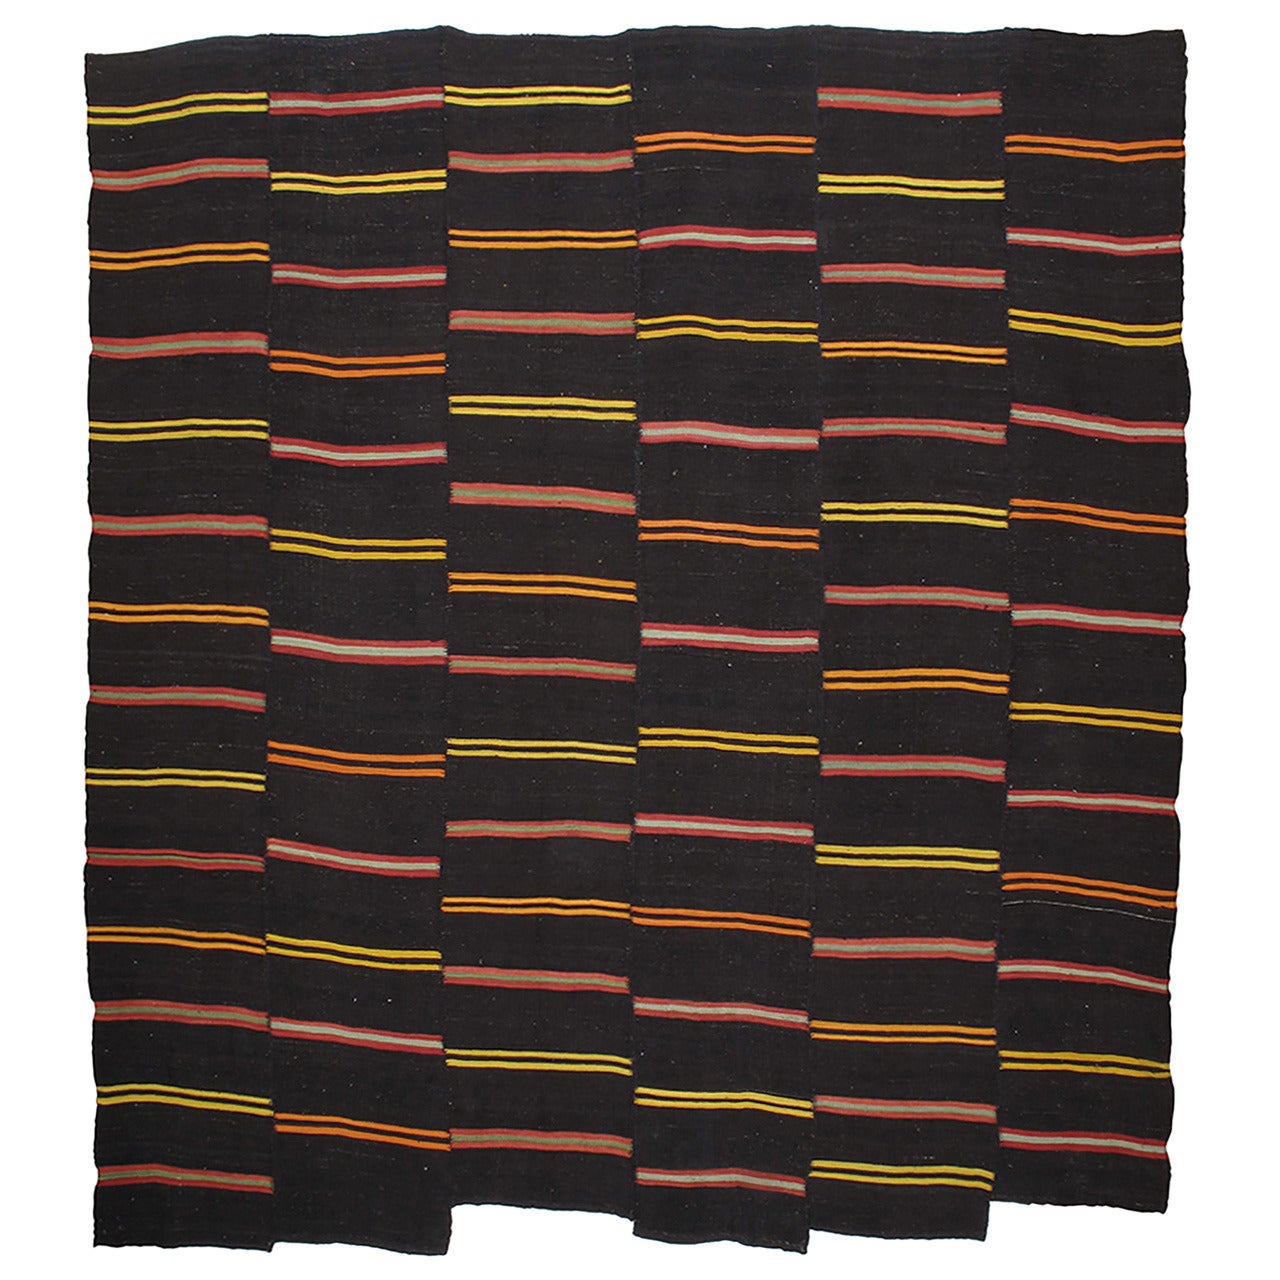 Large Kilim Rug with Bright Stripes